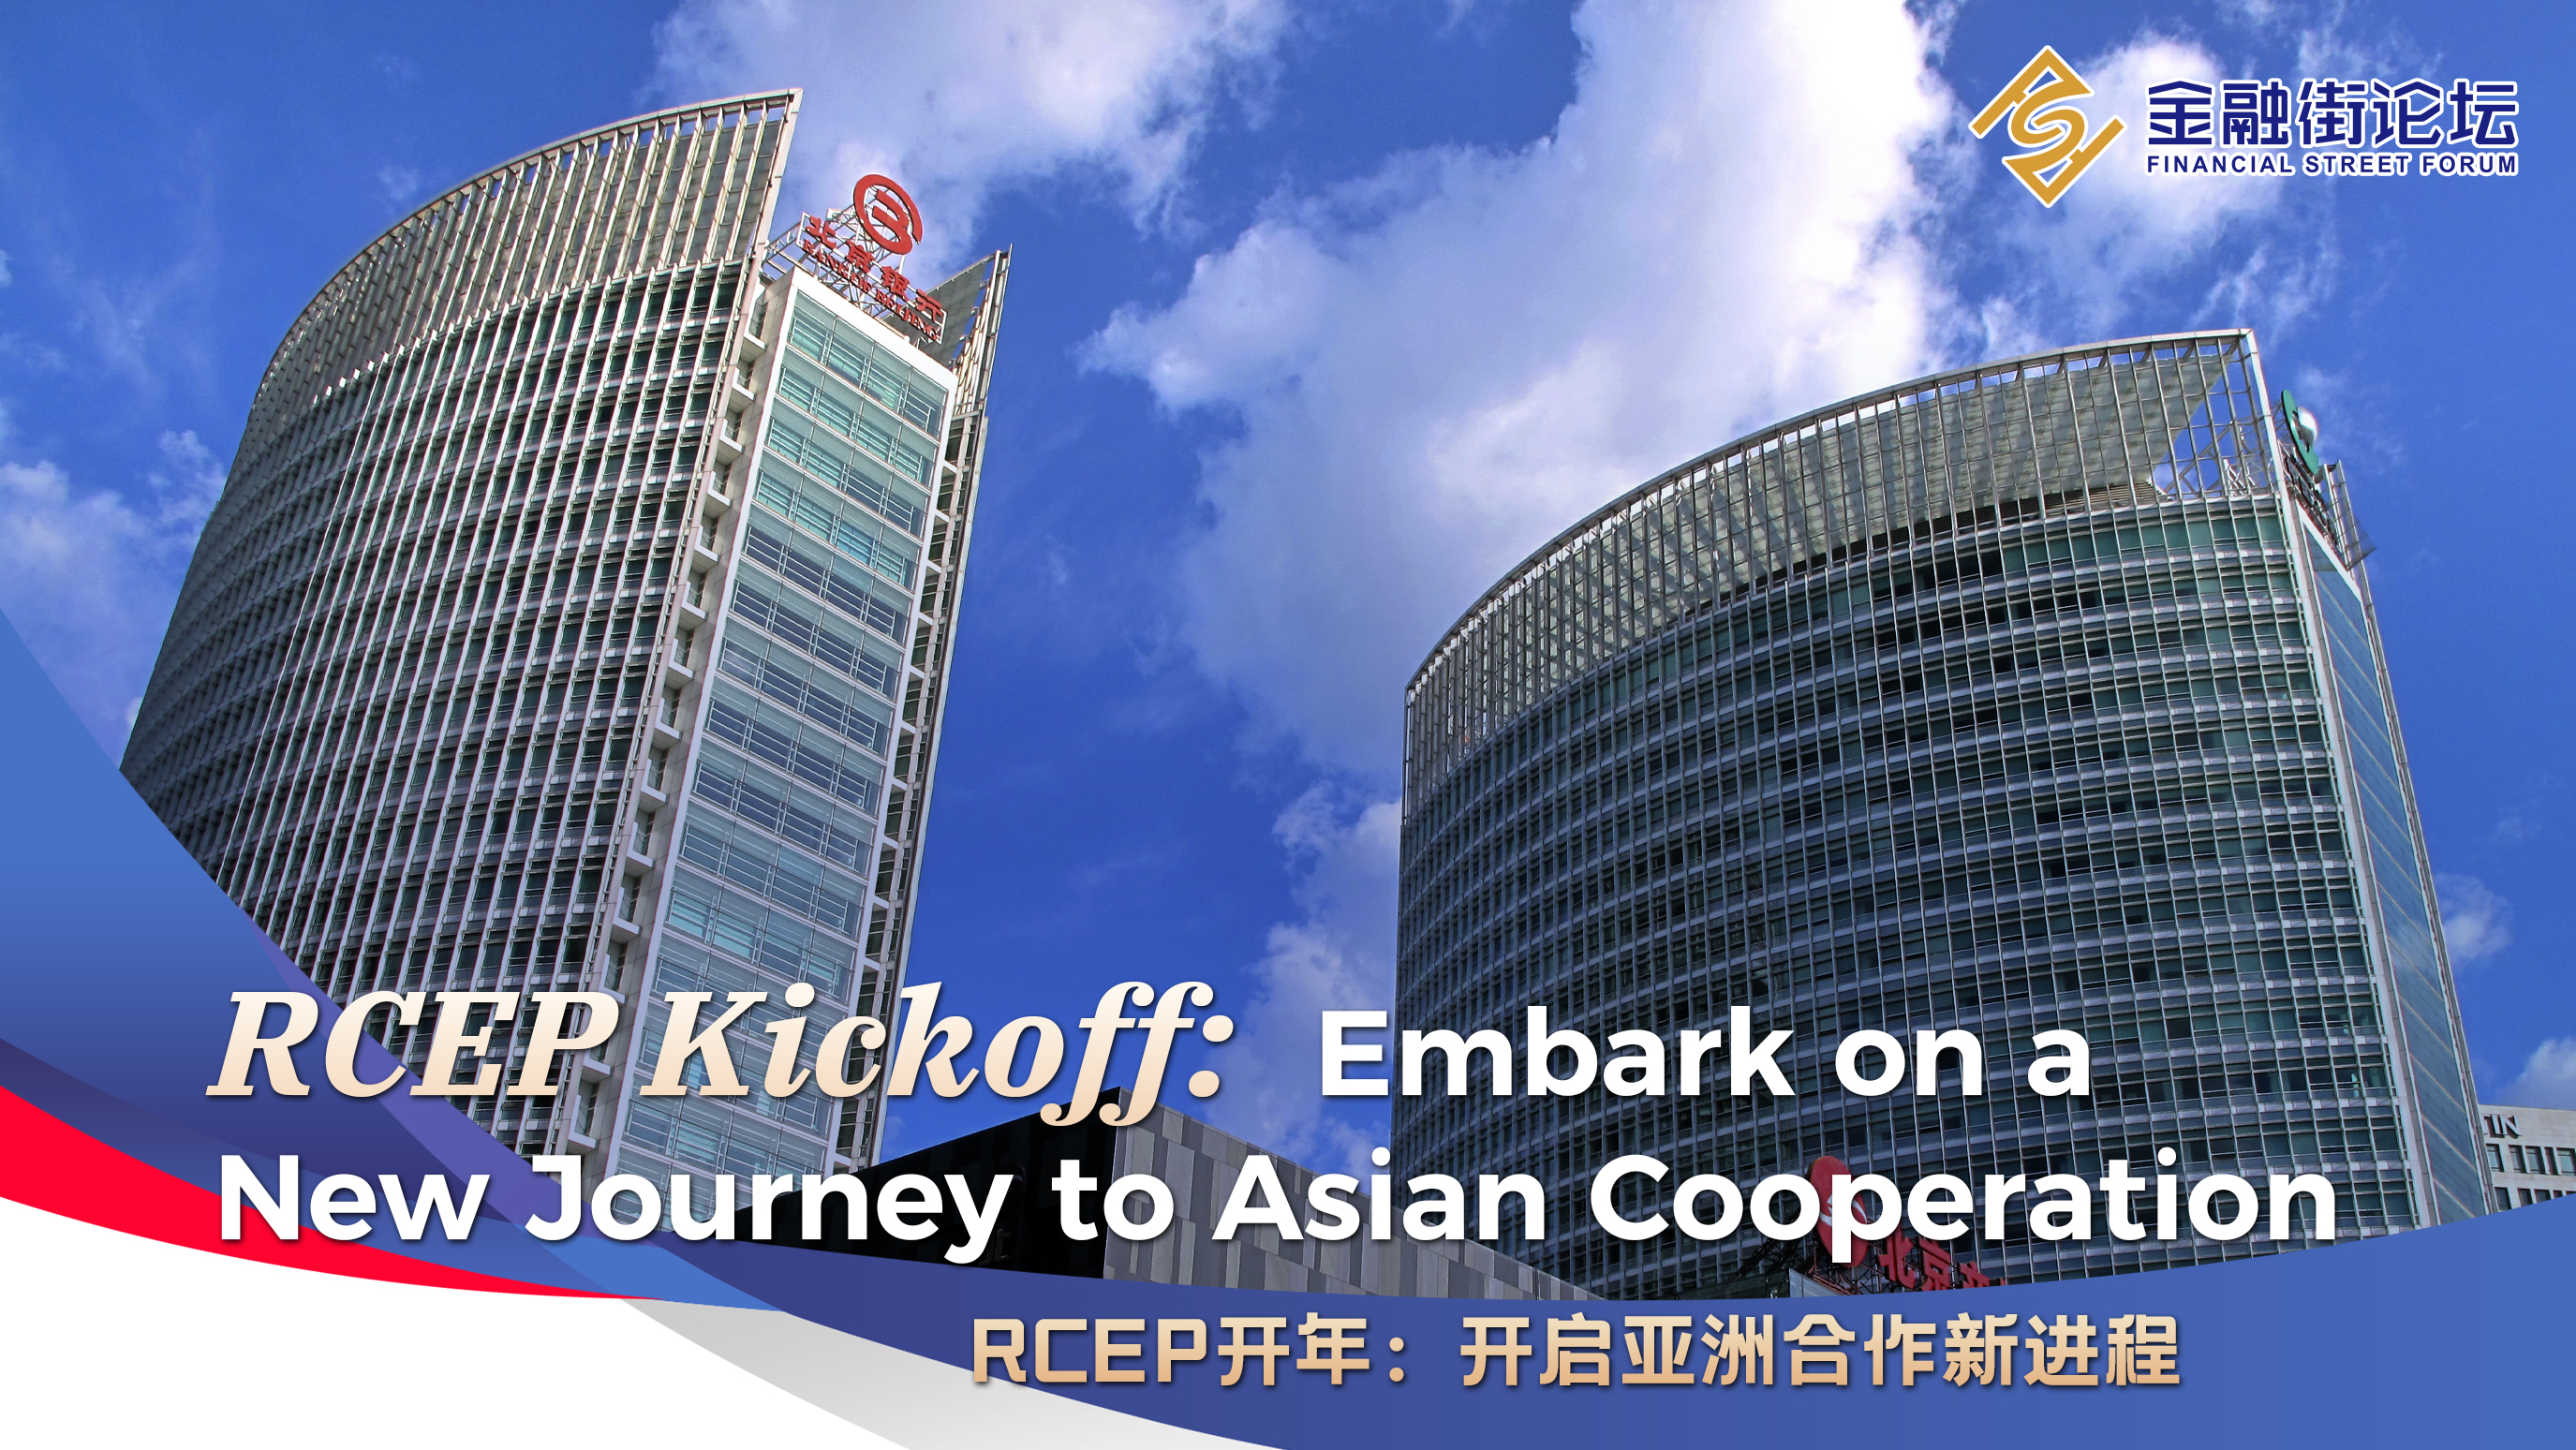 Live: RCEP kickoff - Embark on a new journey to Asian cooperation